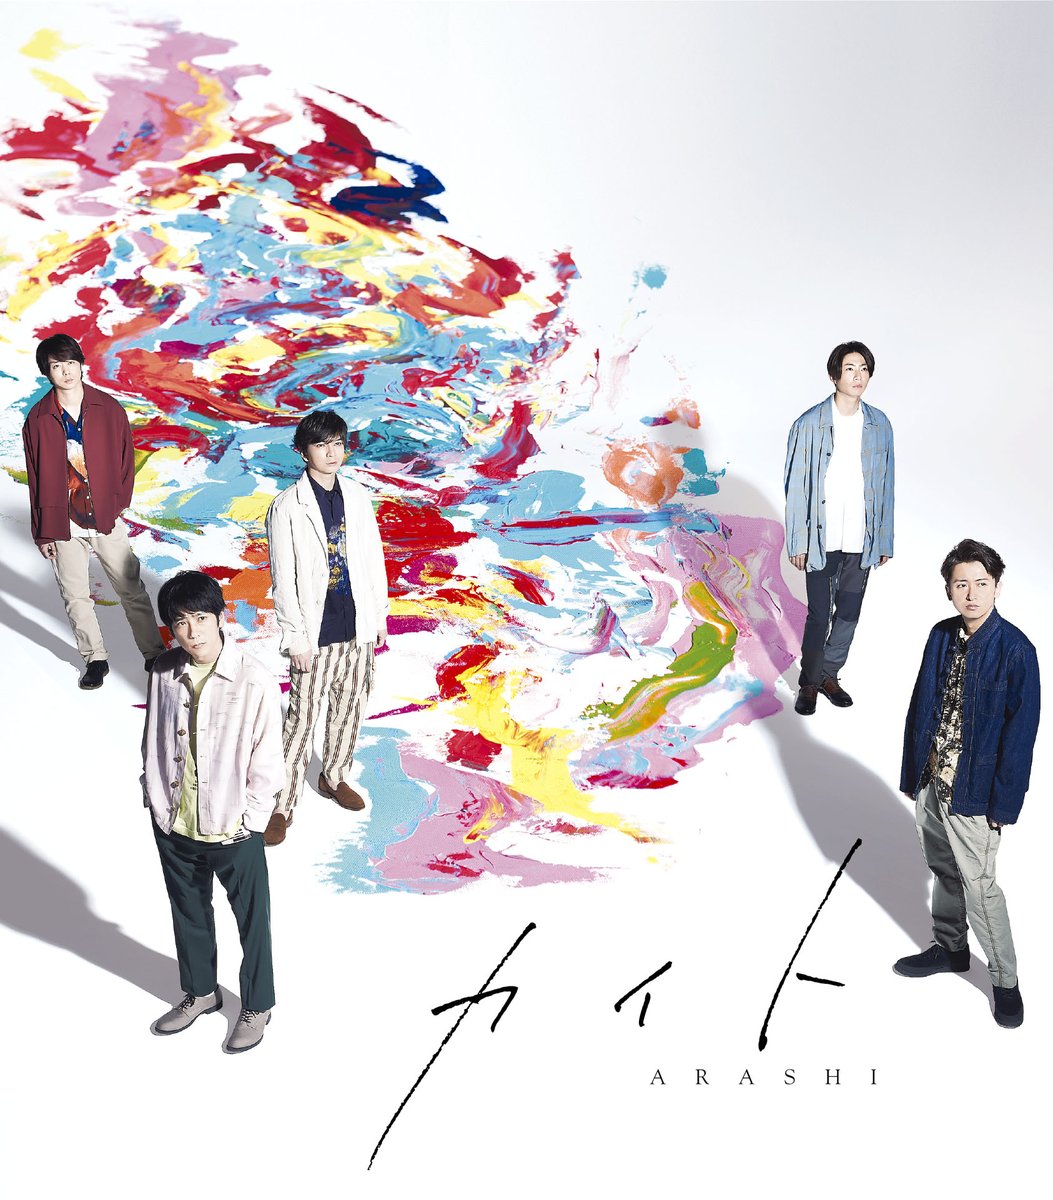 Cover art for『ARASHI - カイト』from the release『Kite